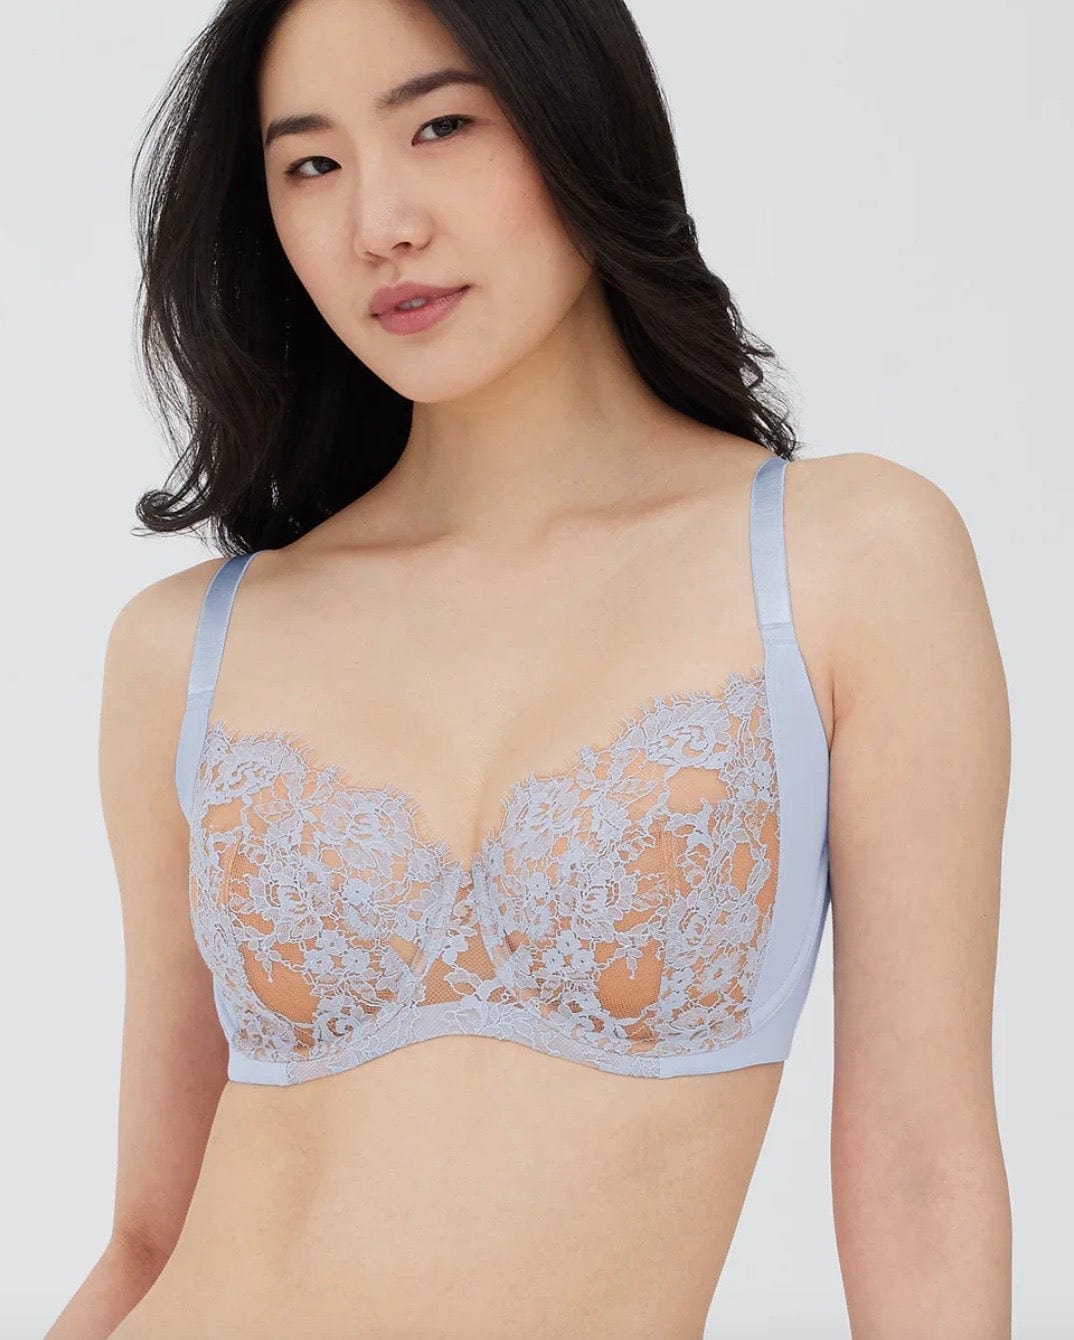 City Chic Ginger Long Line Underwire Bra B - G Cup